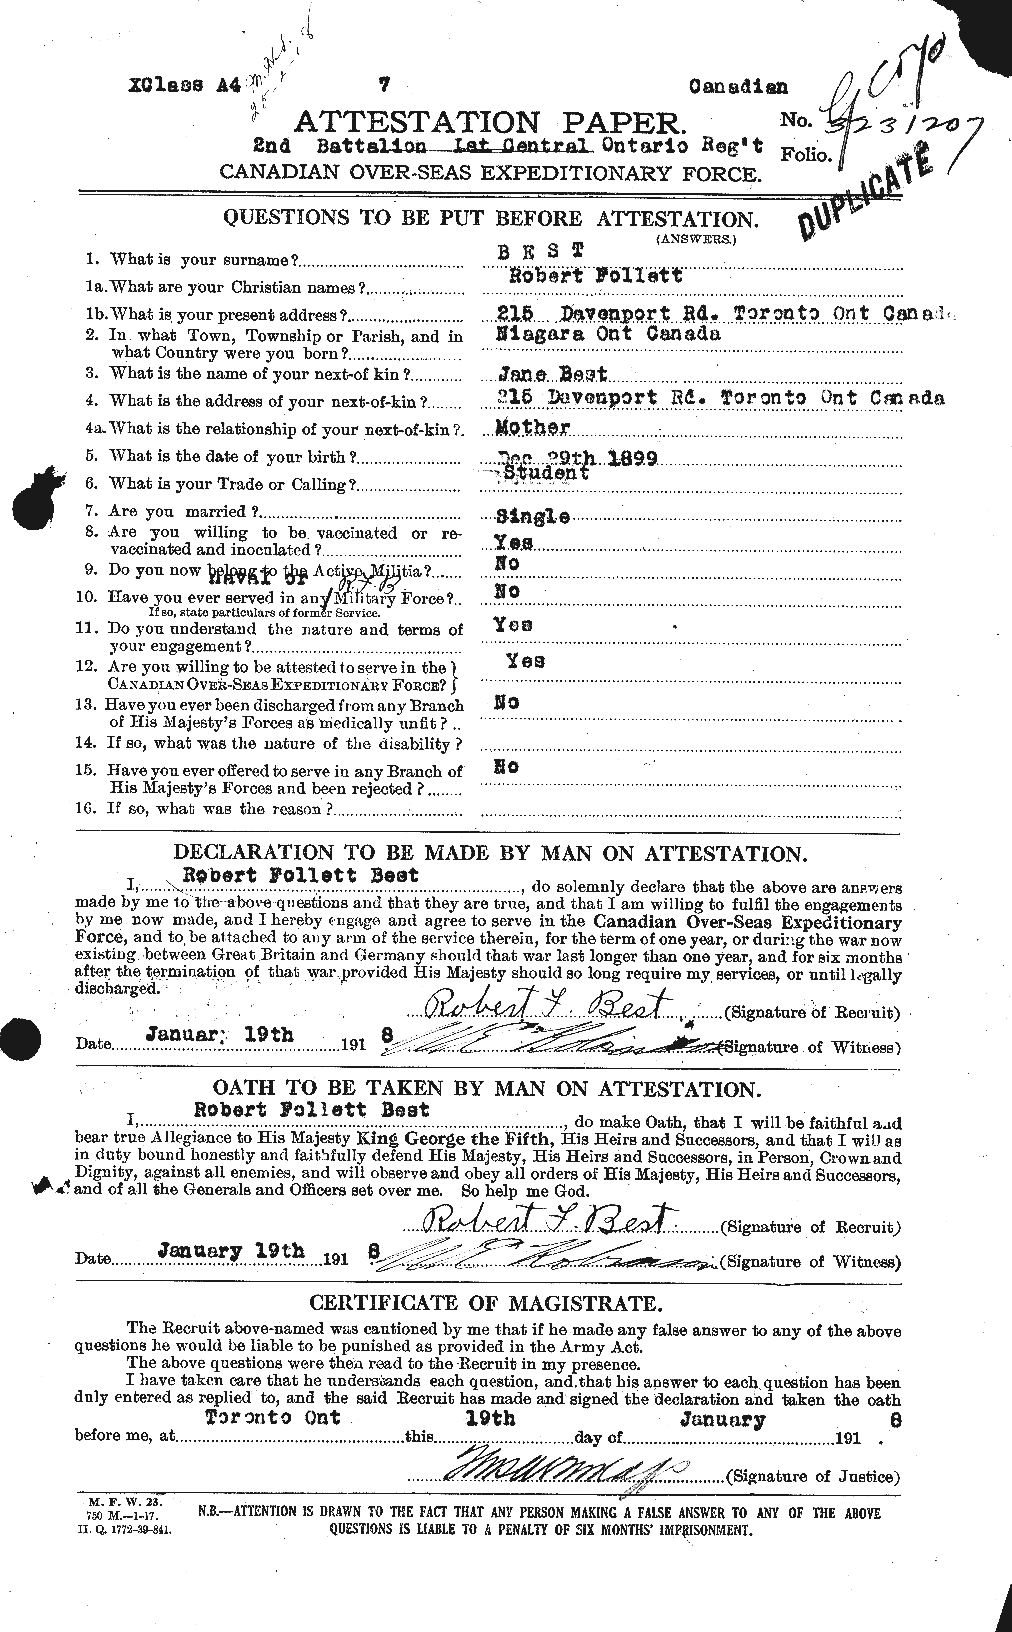 Personnel Records of the First World War - CEF 236869a